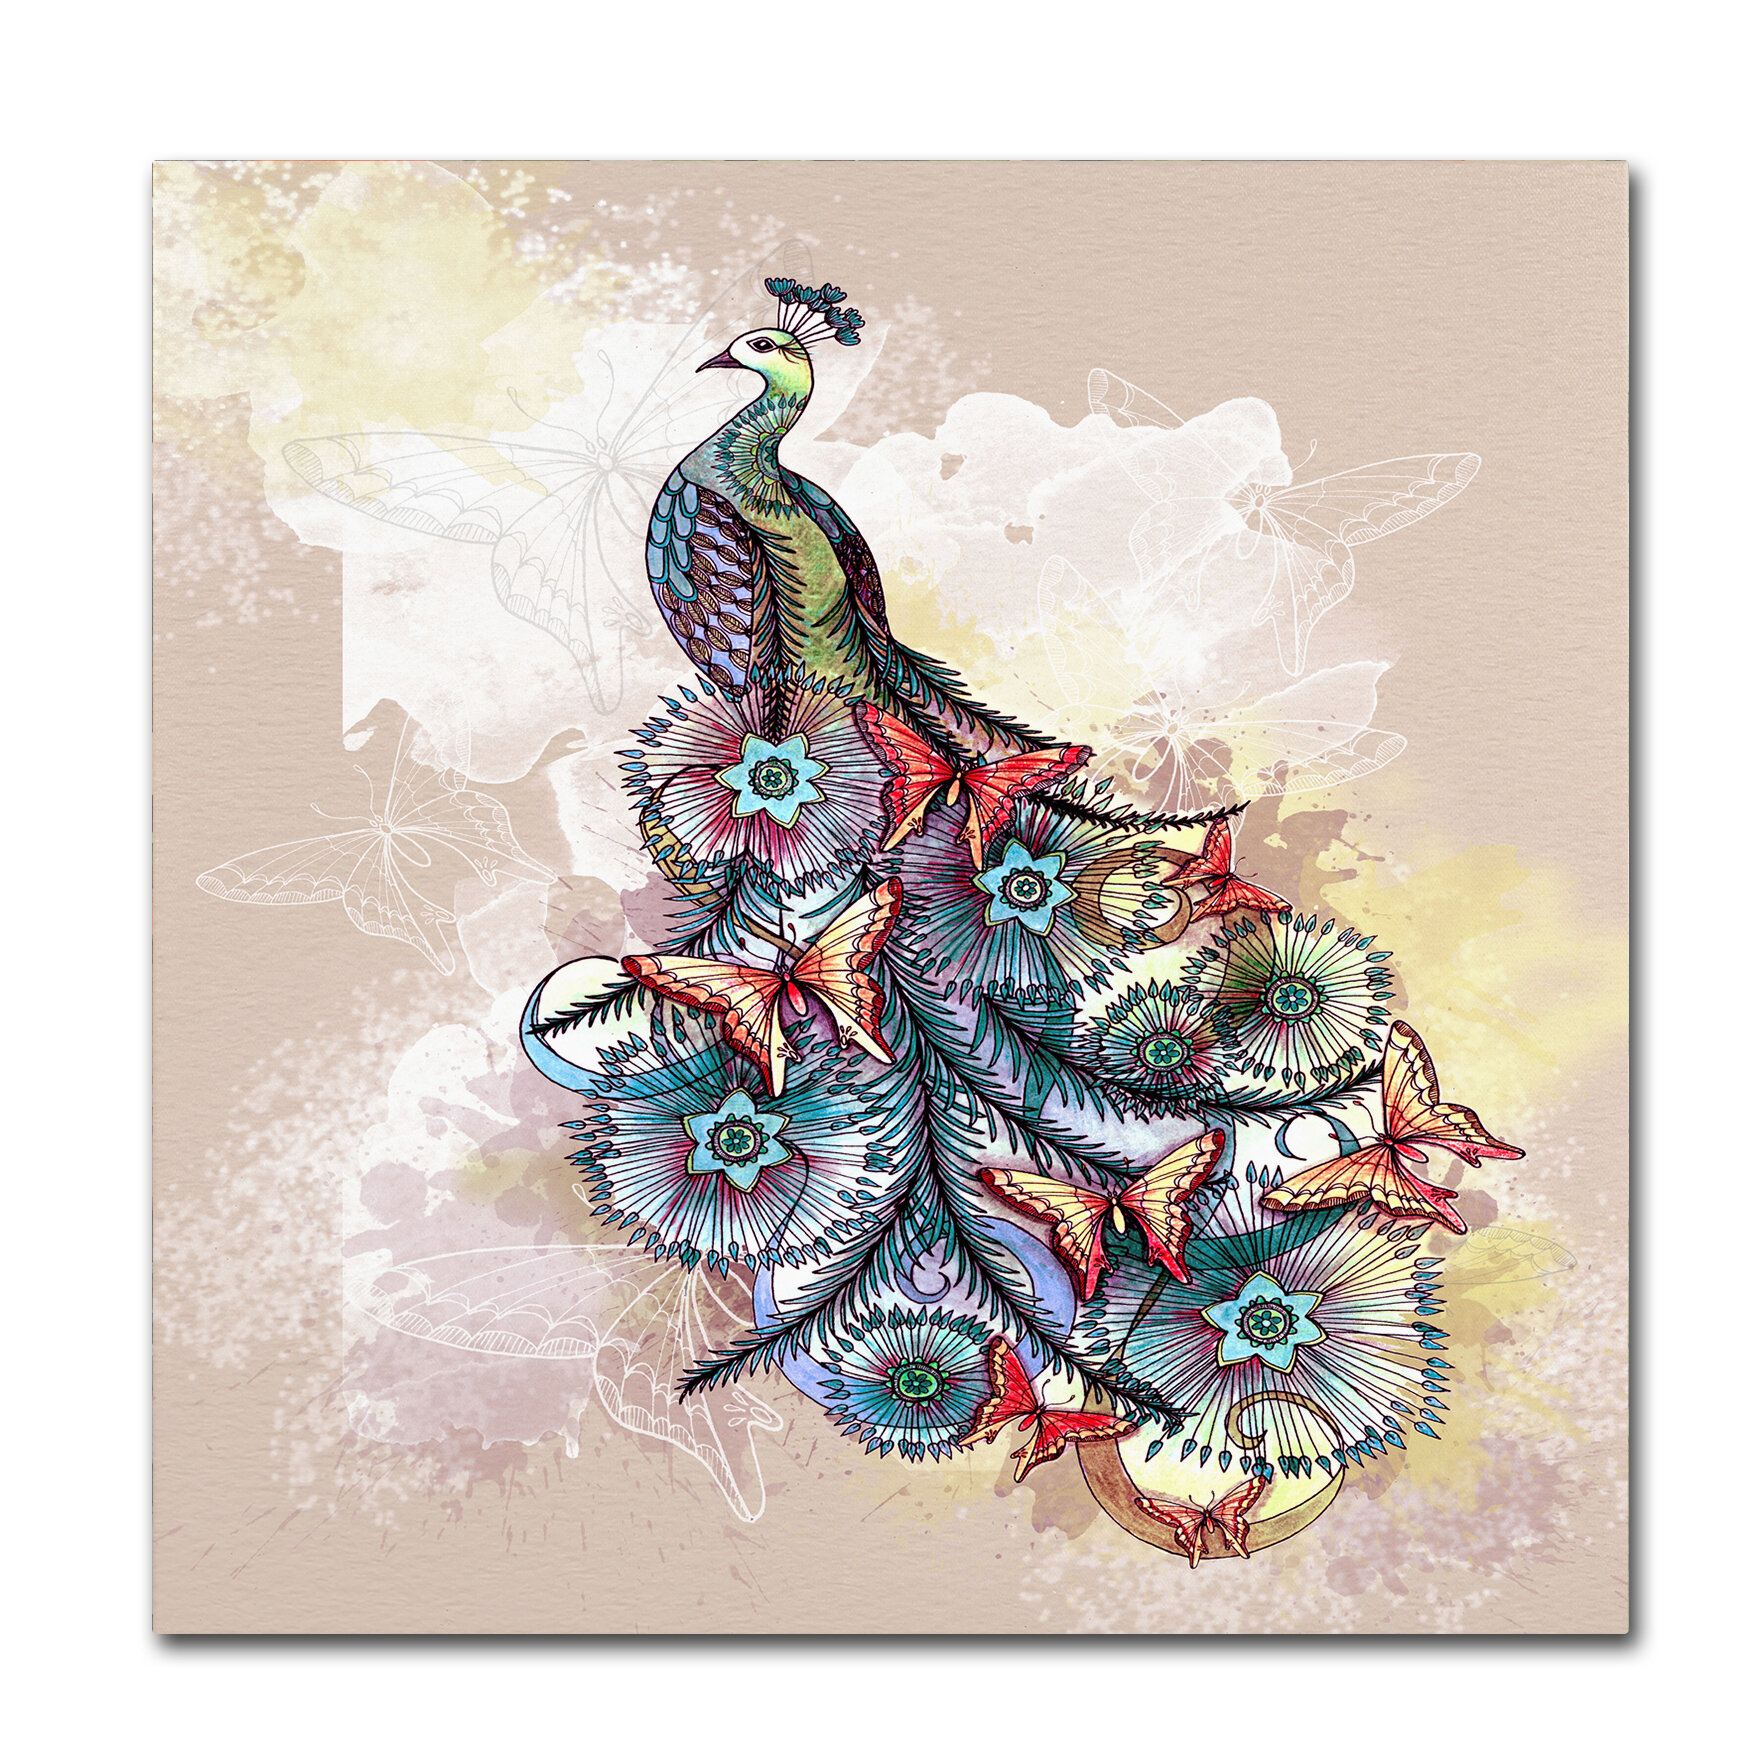 Peacock Decor Red - Wrapped Canvas Graphic Art Print Ebern Designs Size: 35 H x 35 W x 2 D